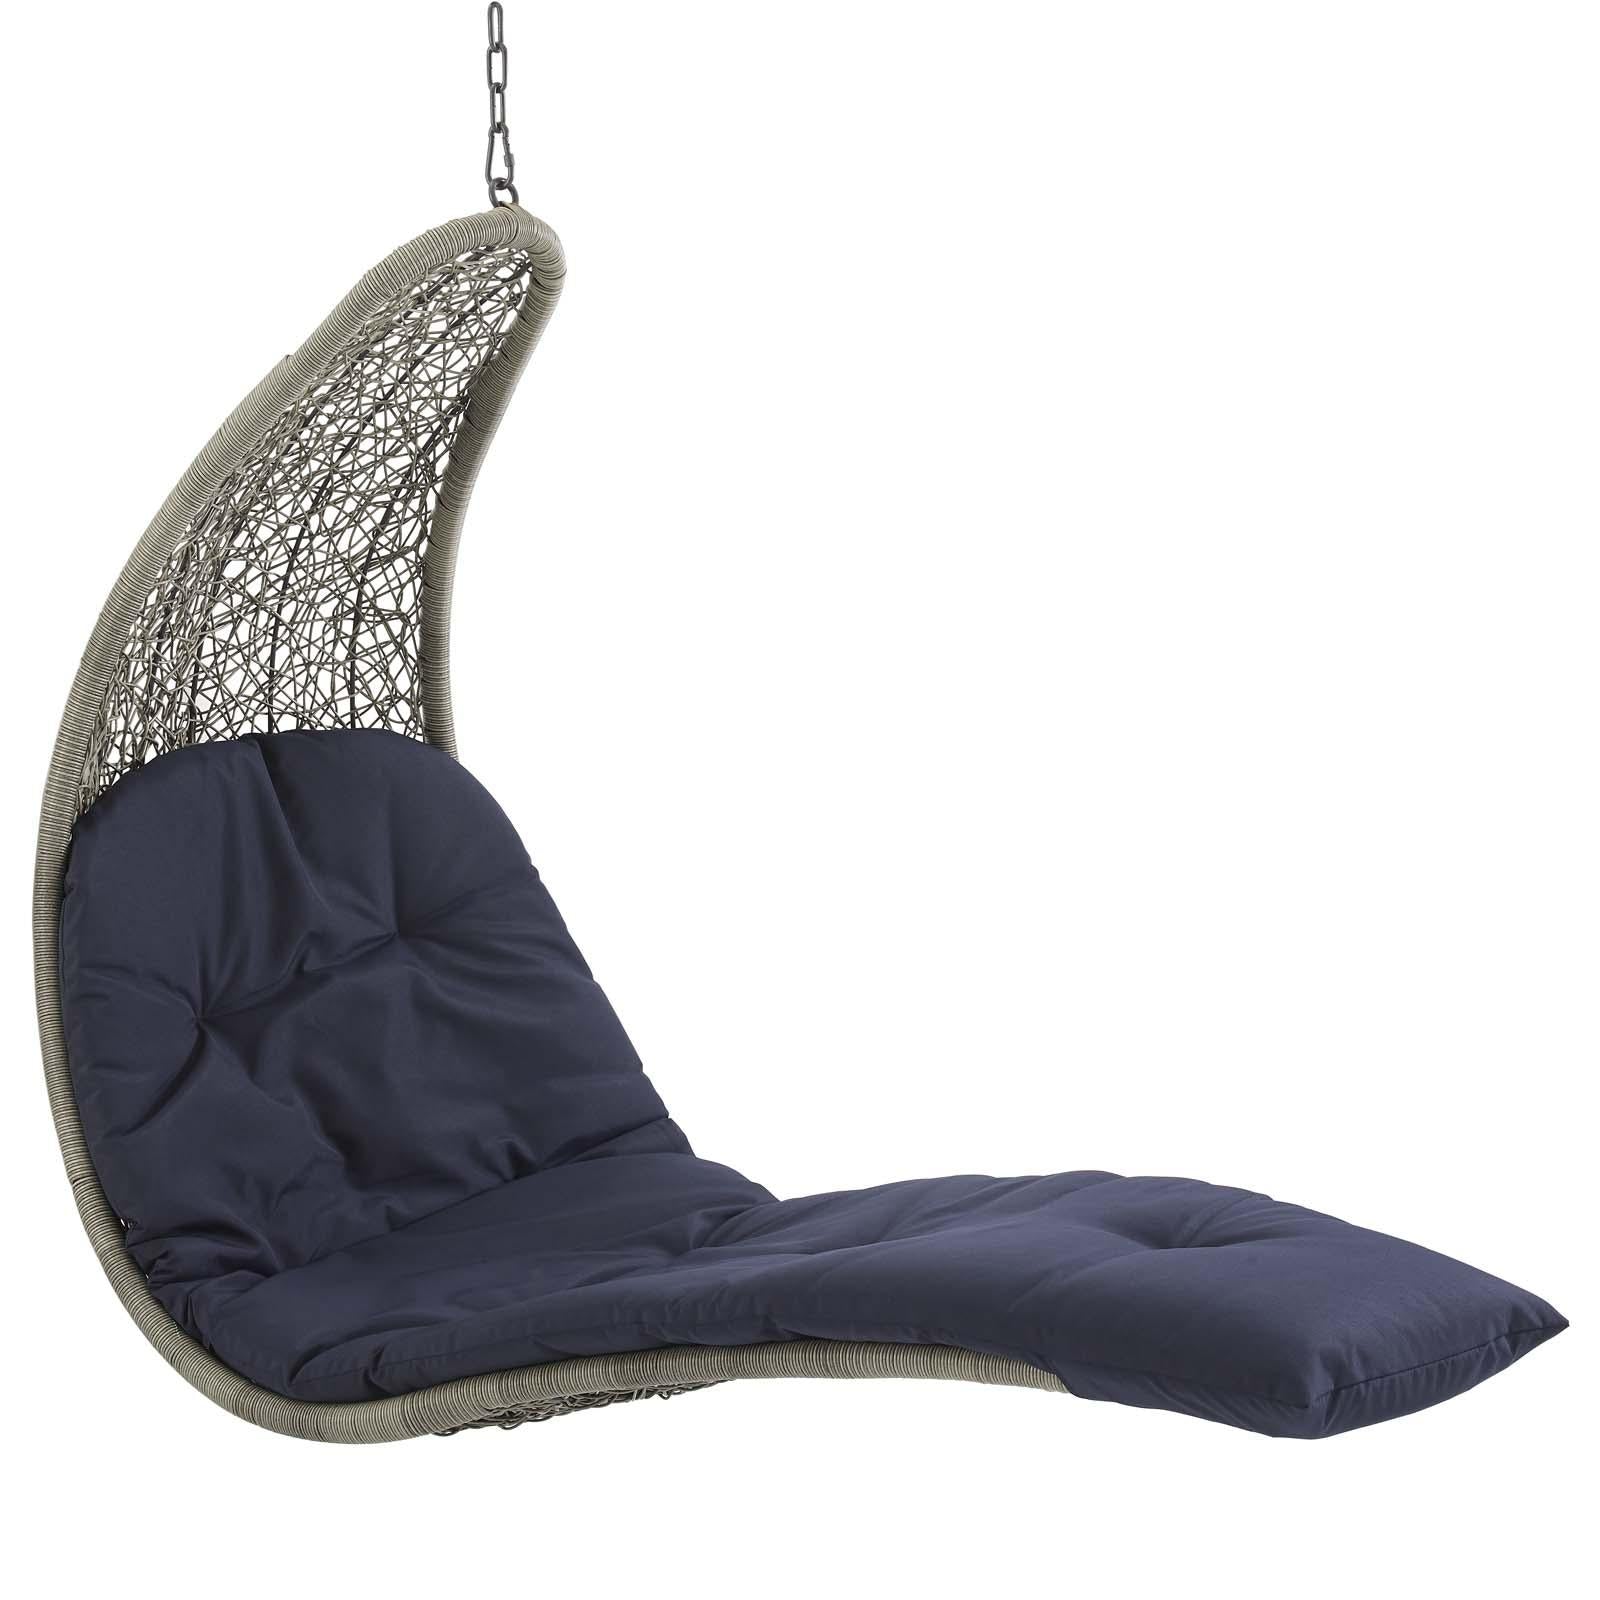 Modway Furniture Modern Landscape Hanging Chaise Lounge Outdoor Patio Swing Chair - EEI-2952